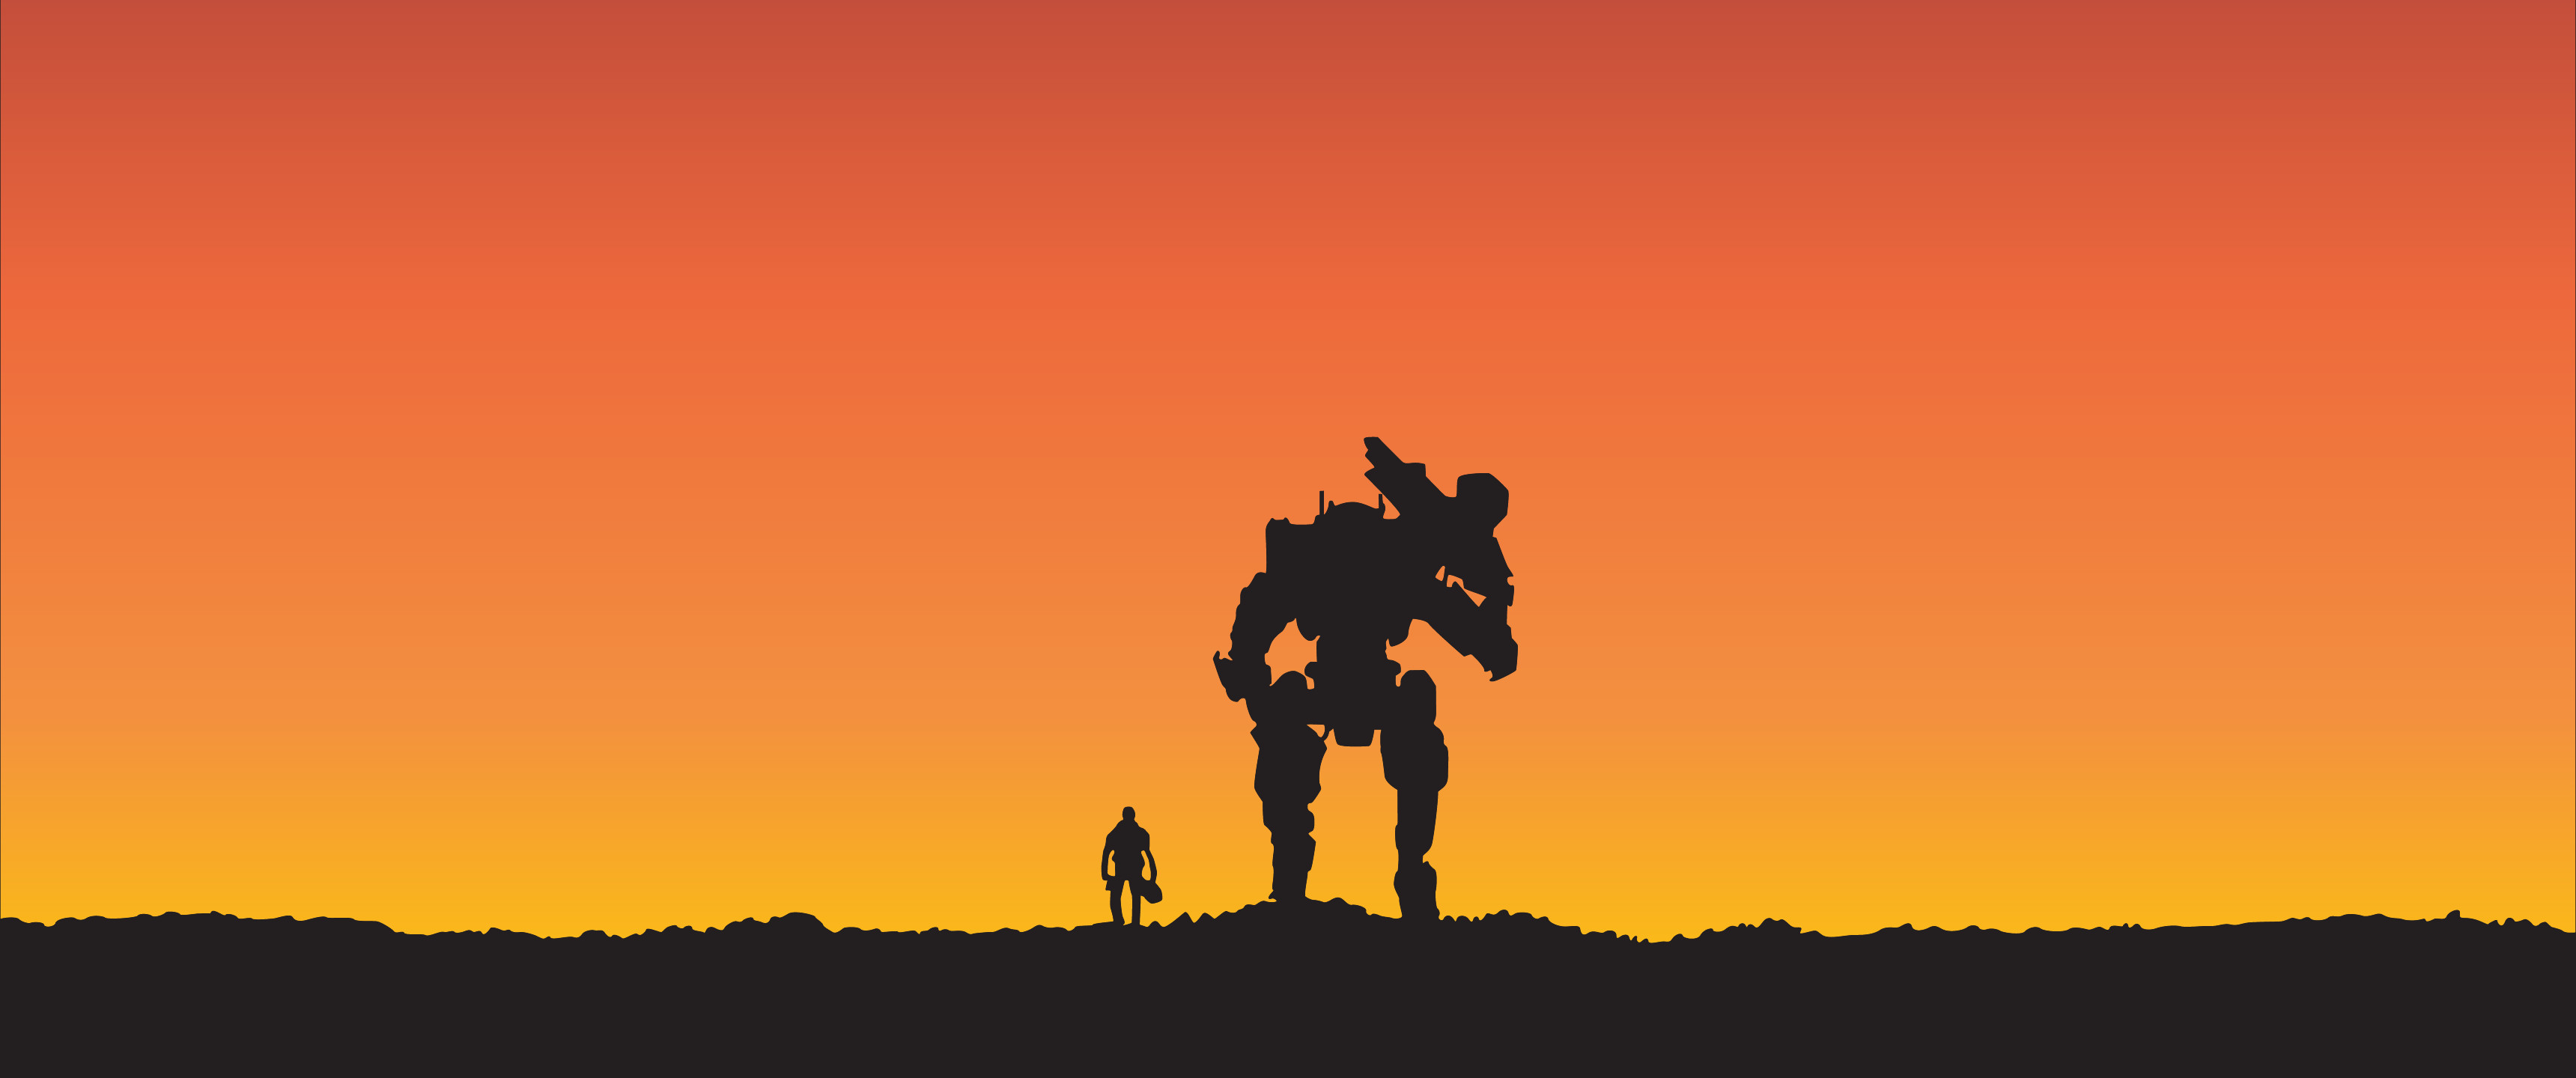 3440x1440 I was told to post this here, a Titanfall 2 wallpaper I made. Enjoy!